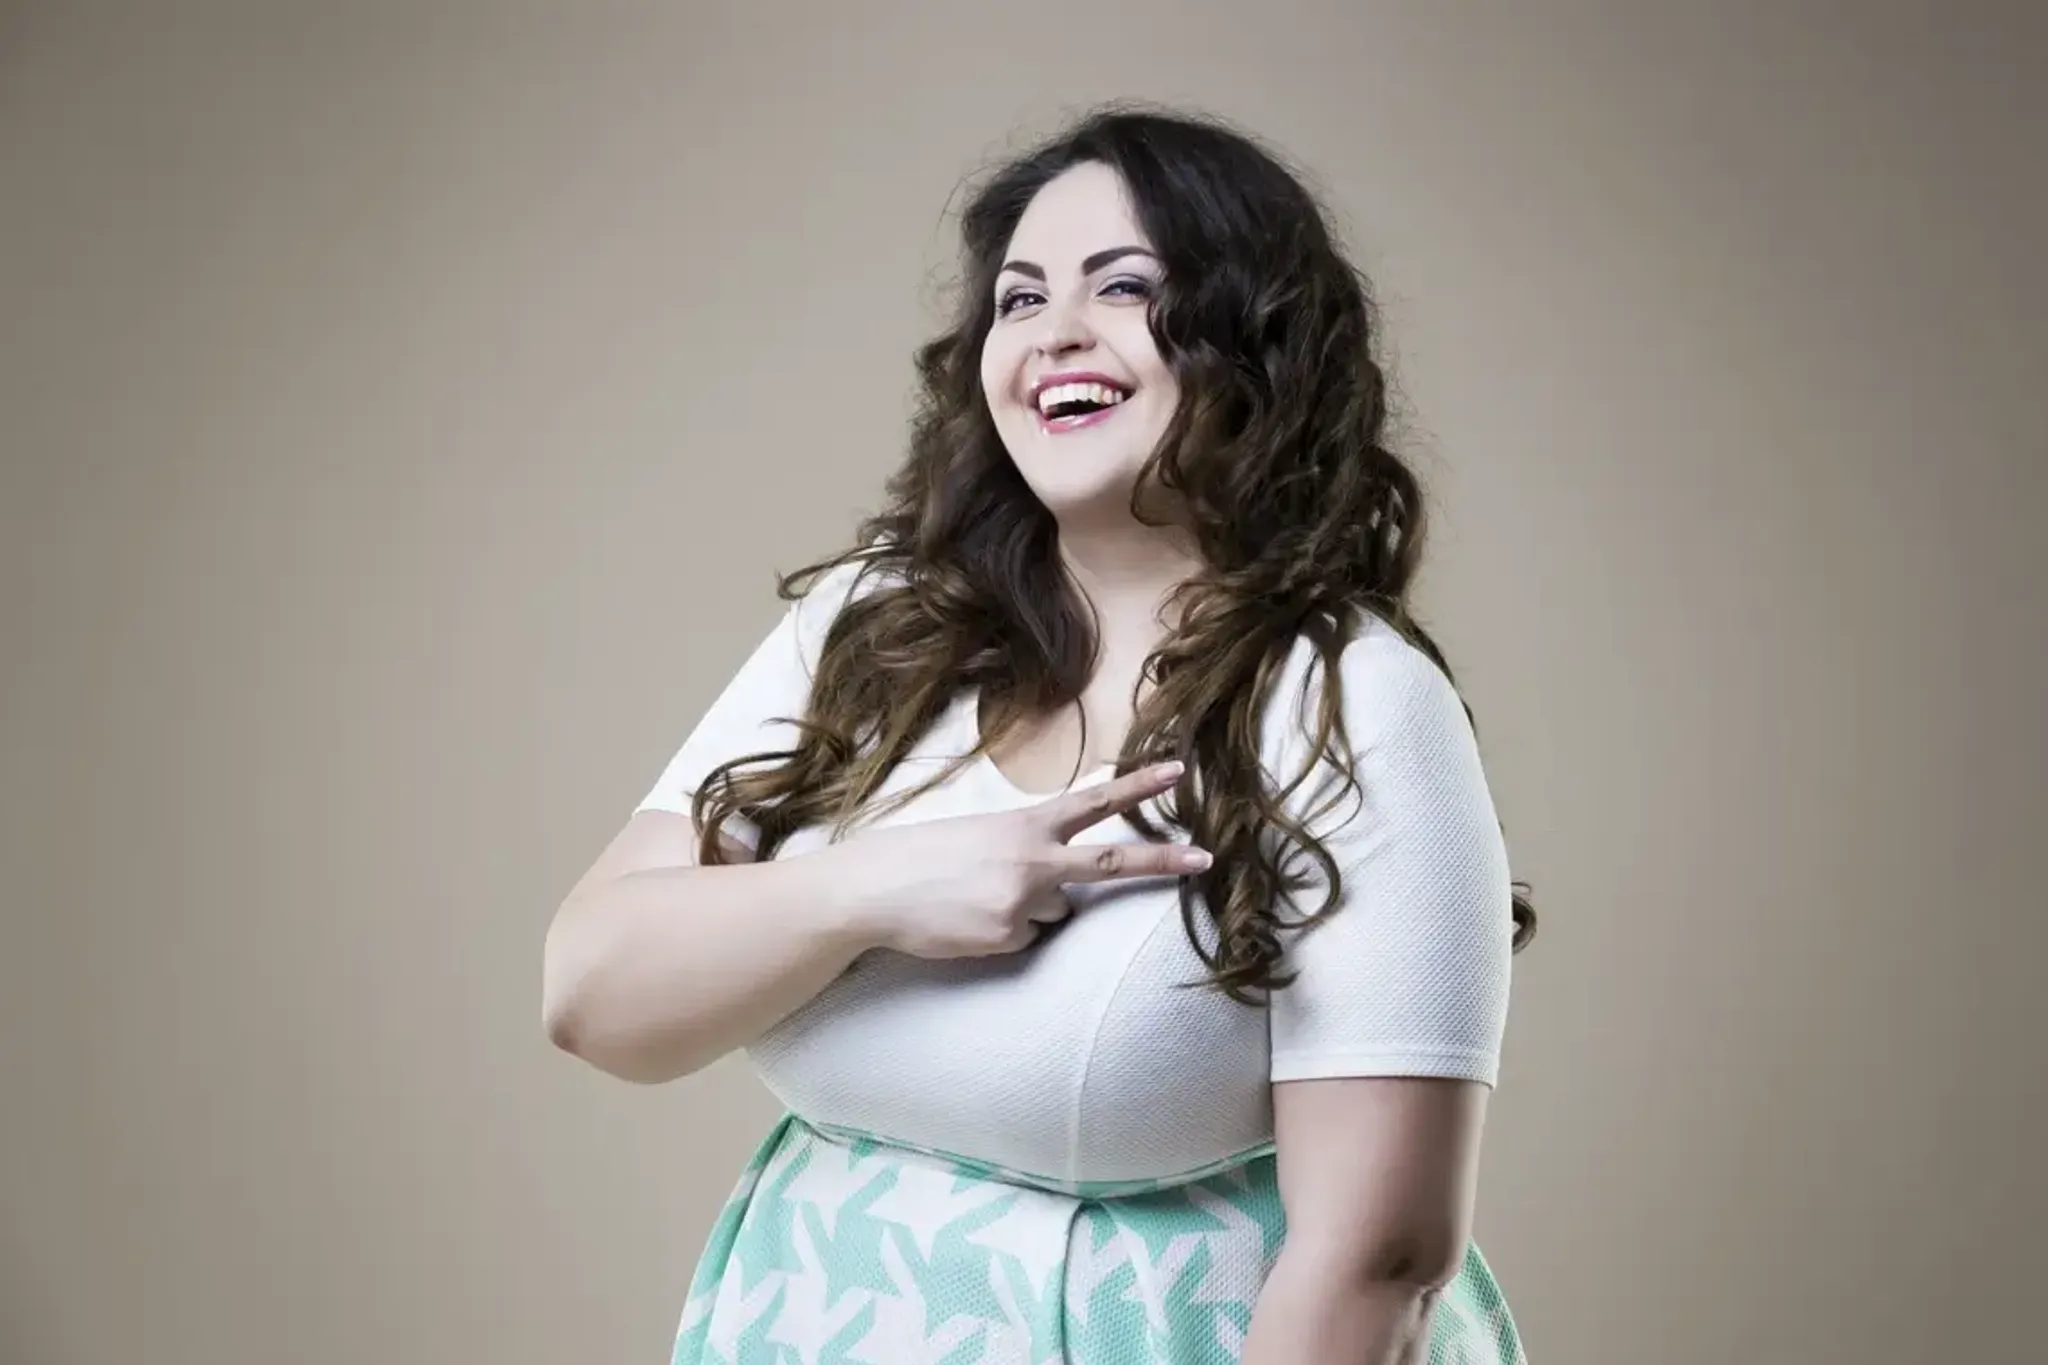 A Sequel to Tess Holliday(beauty standard) WooPlus Launches A Happy Campaign